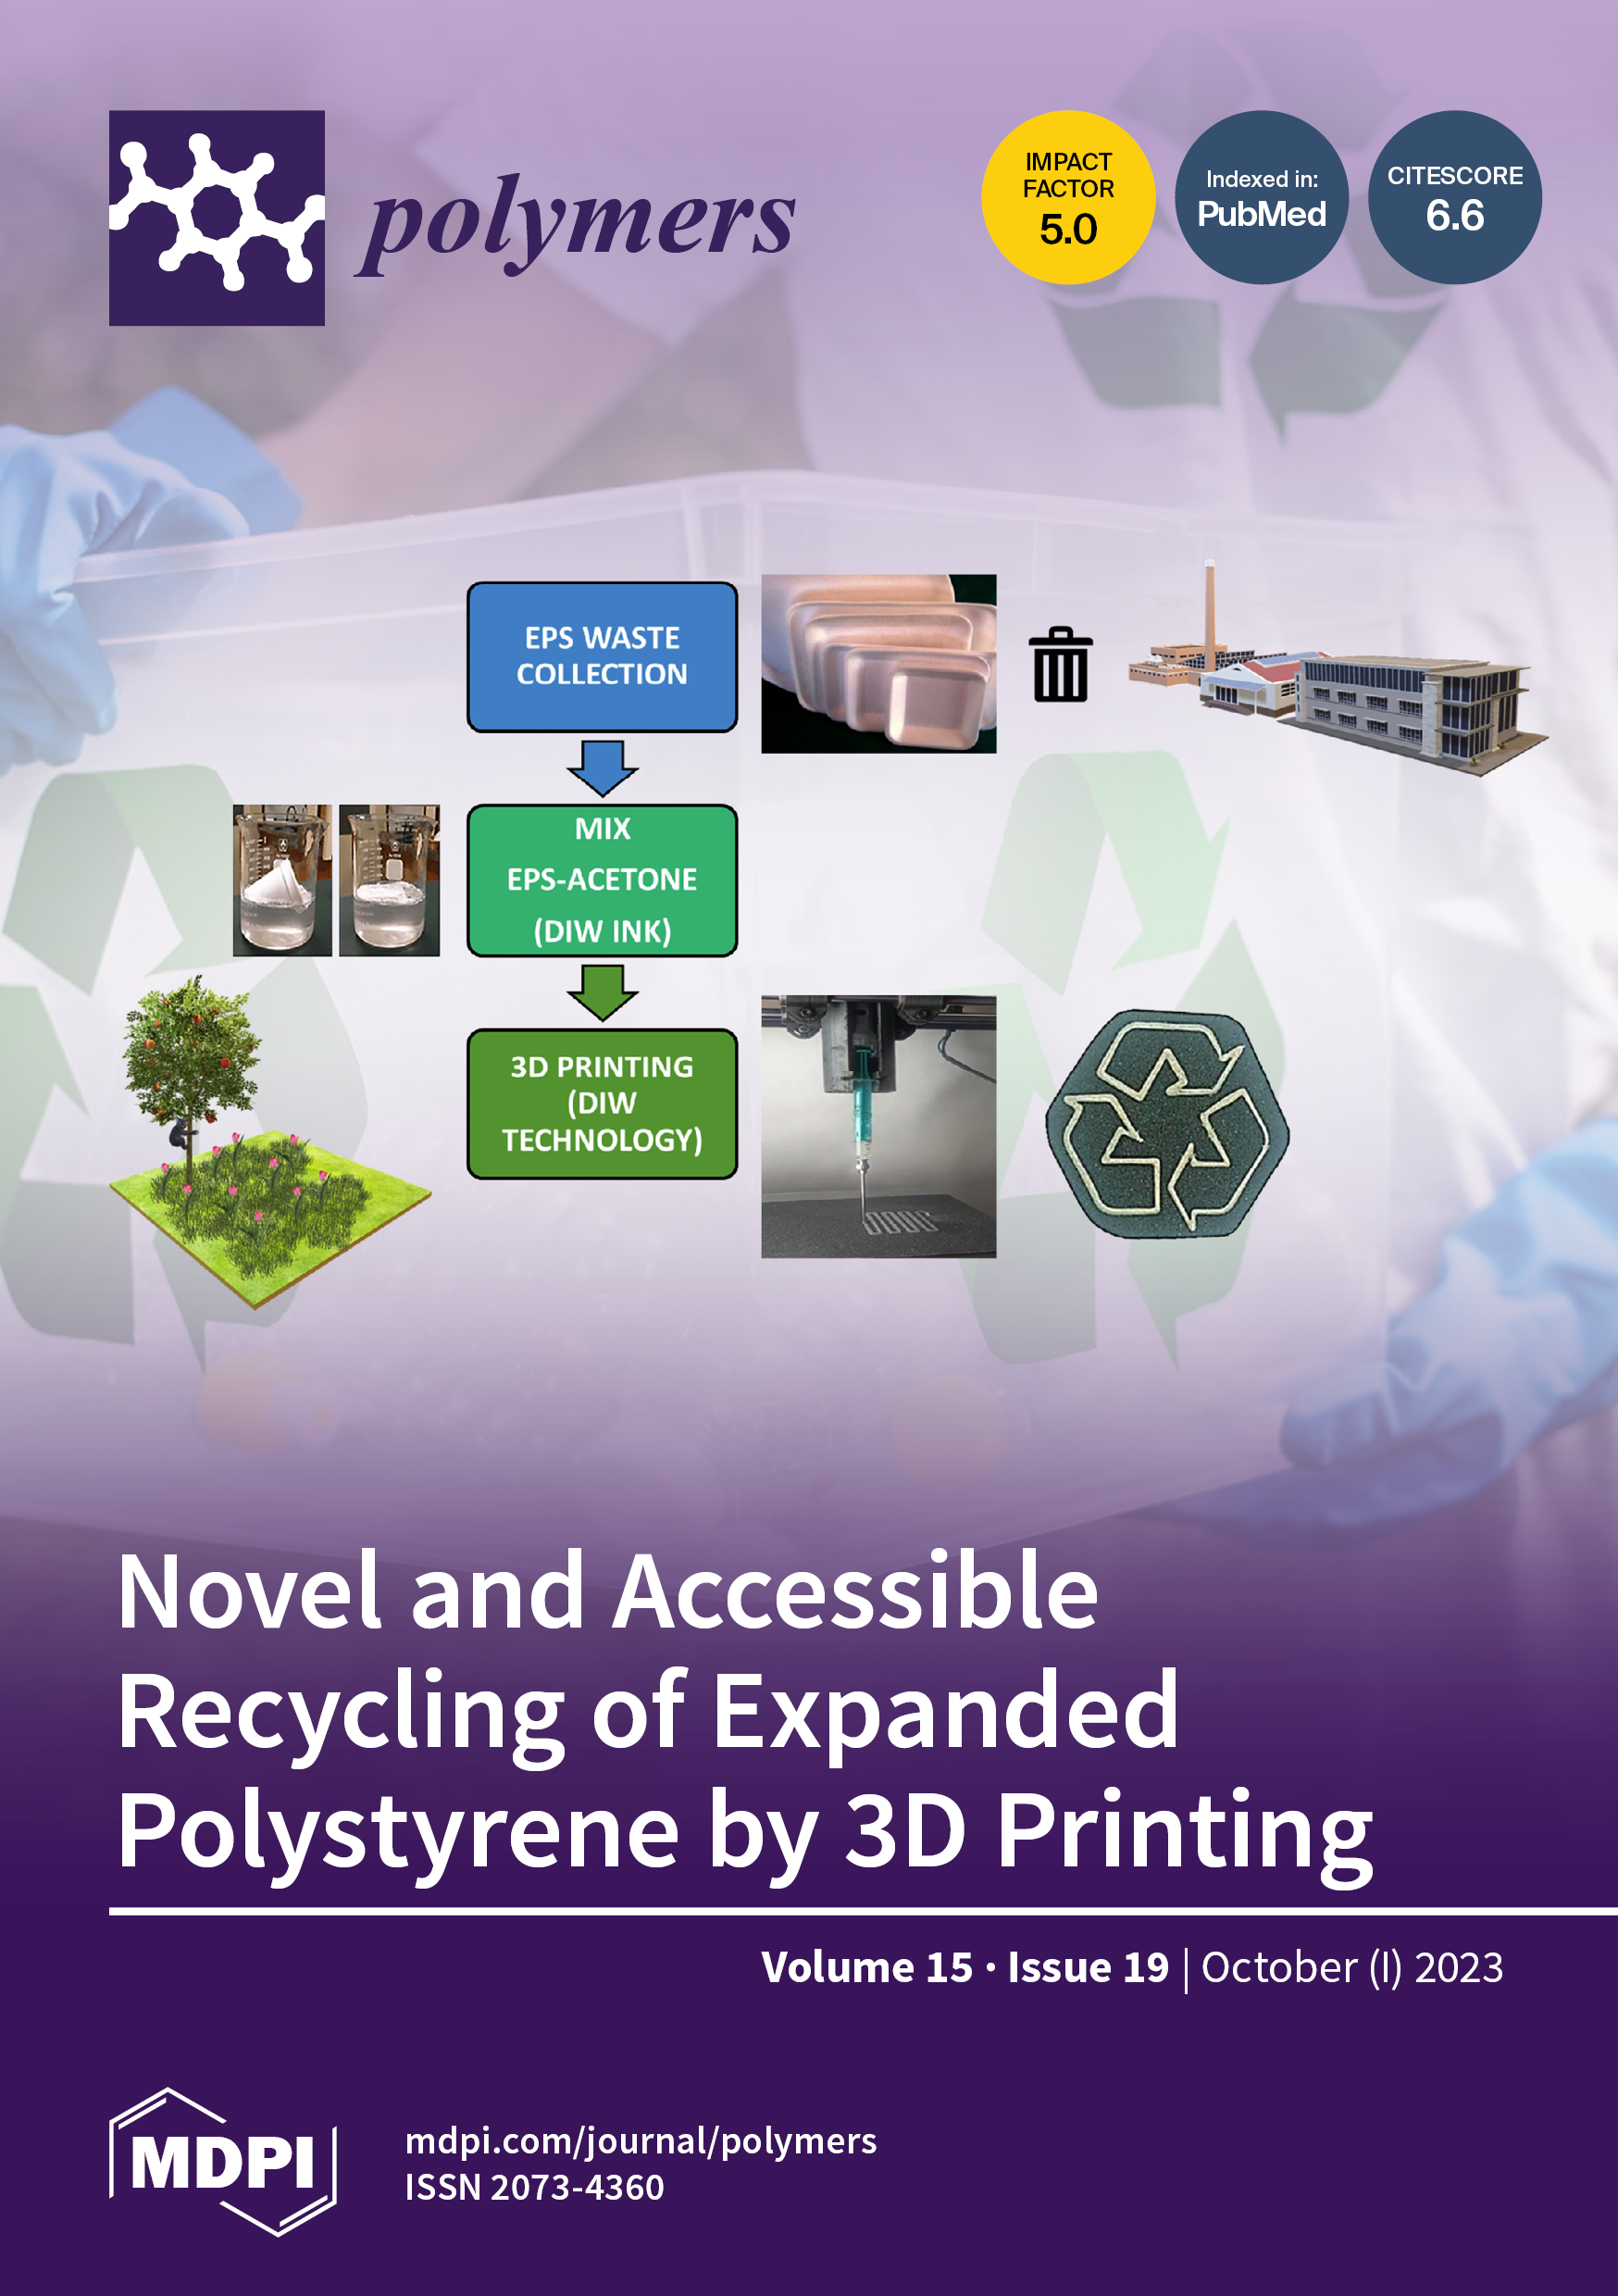 https://www.mdpi.com/files/uploaded/covers/polymers/big_cover-polymers-v15-i19.png